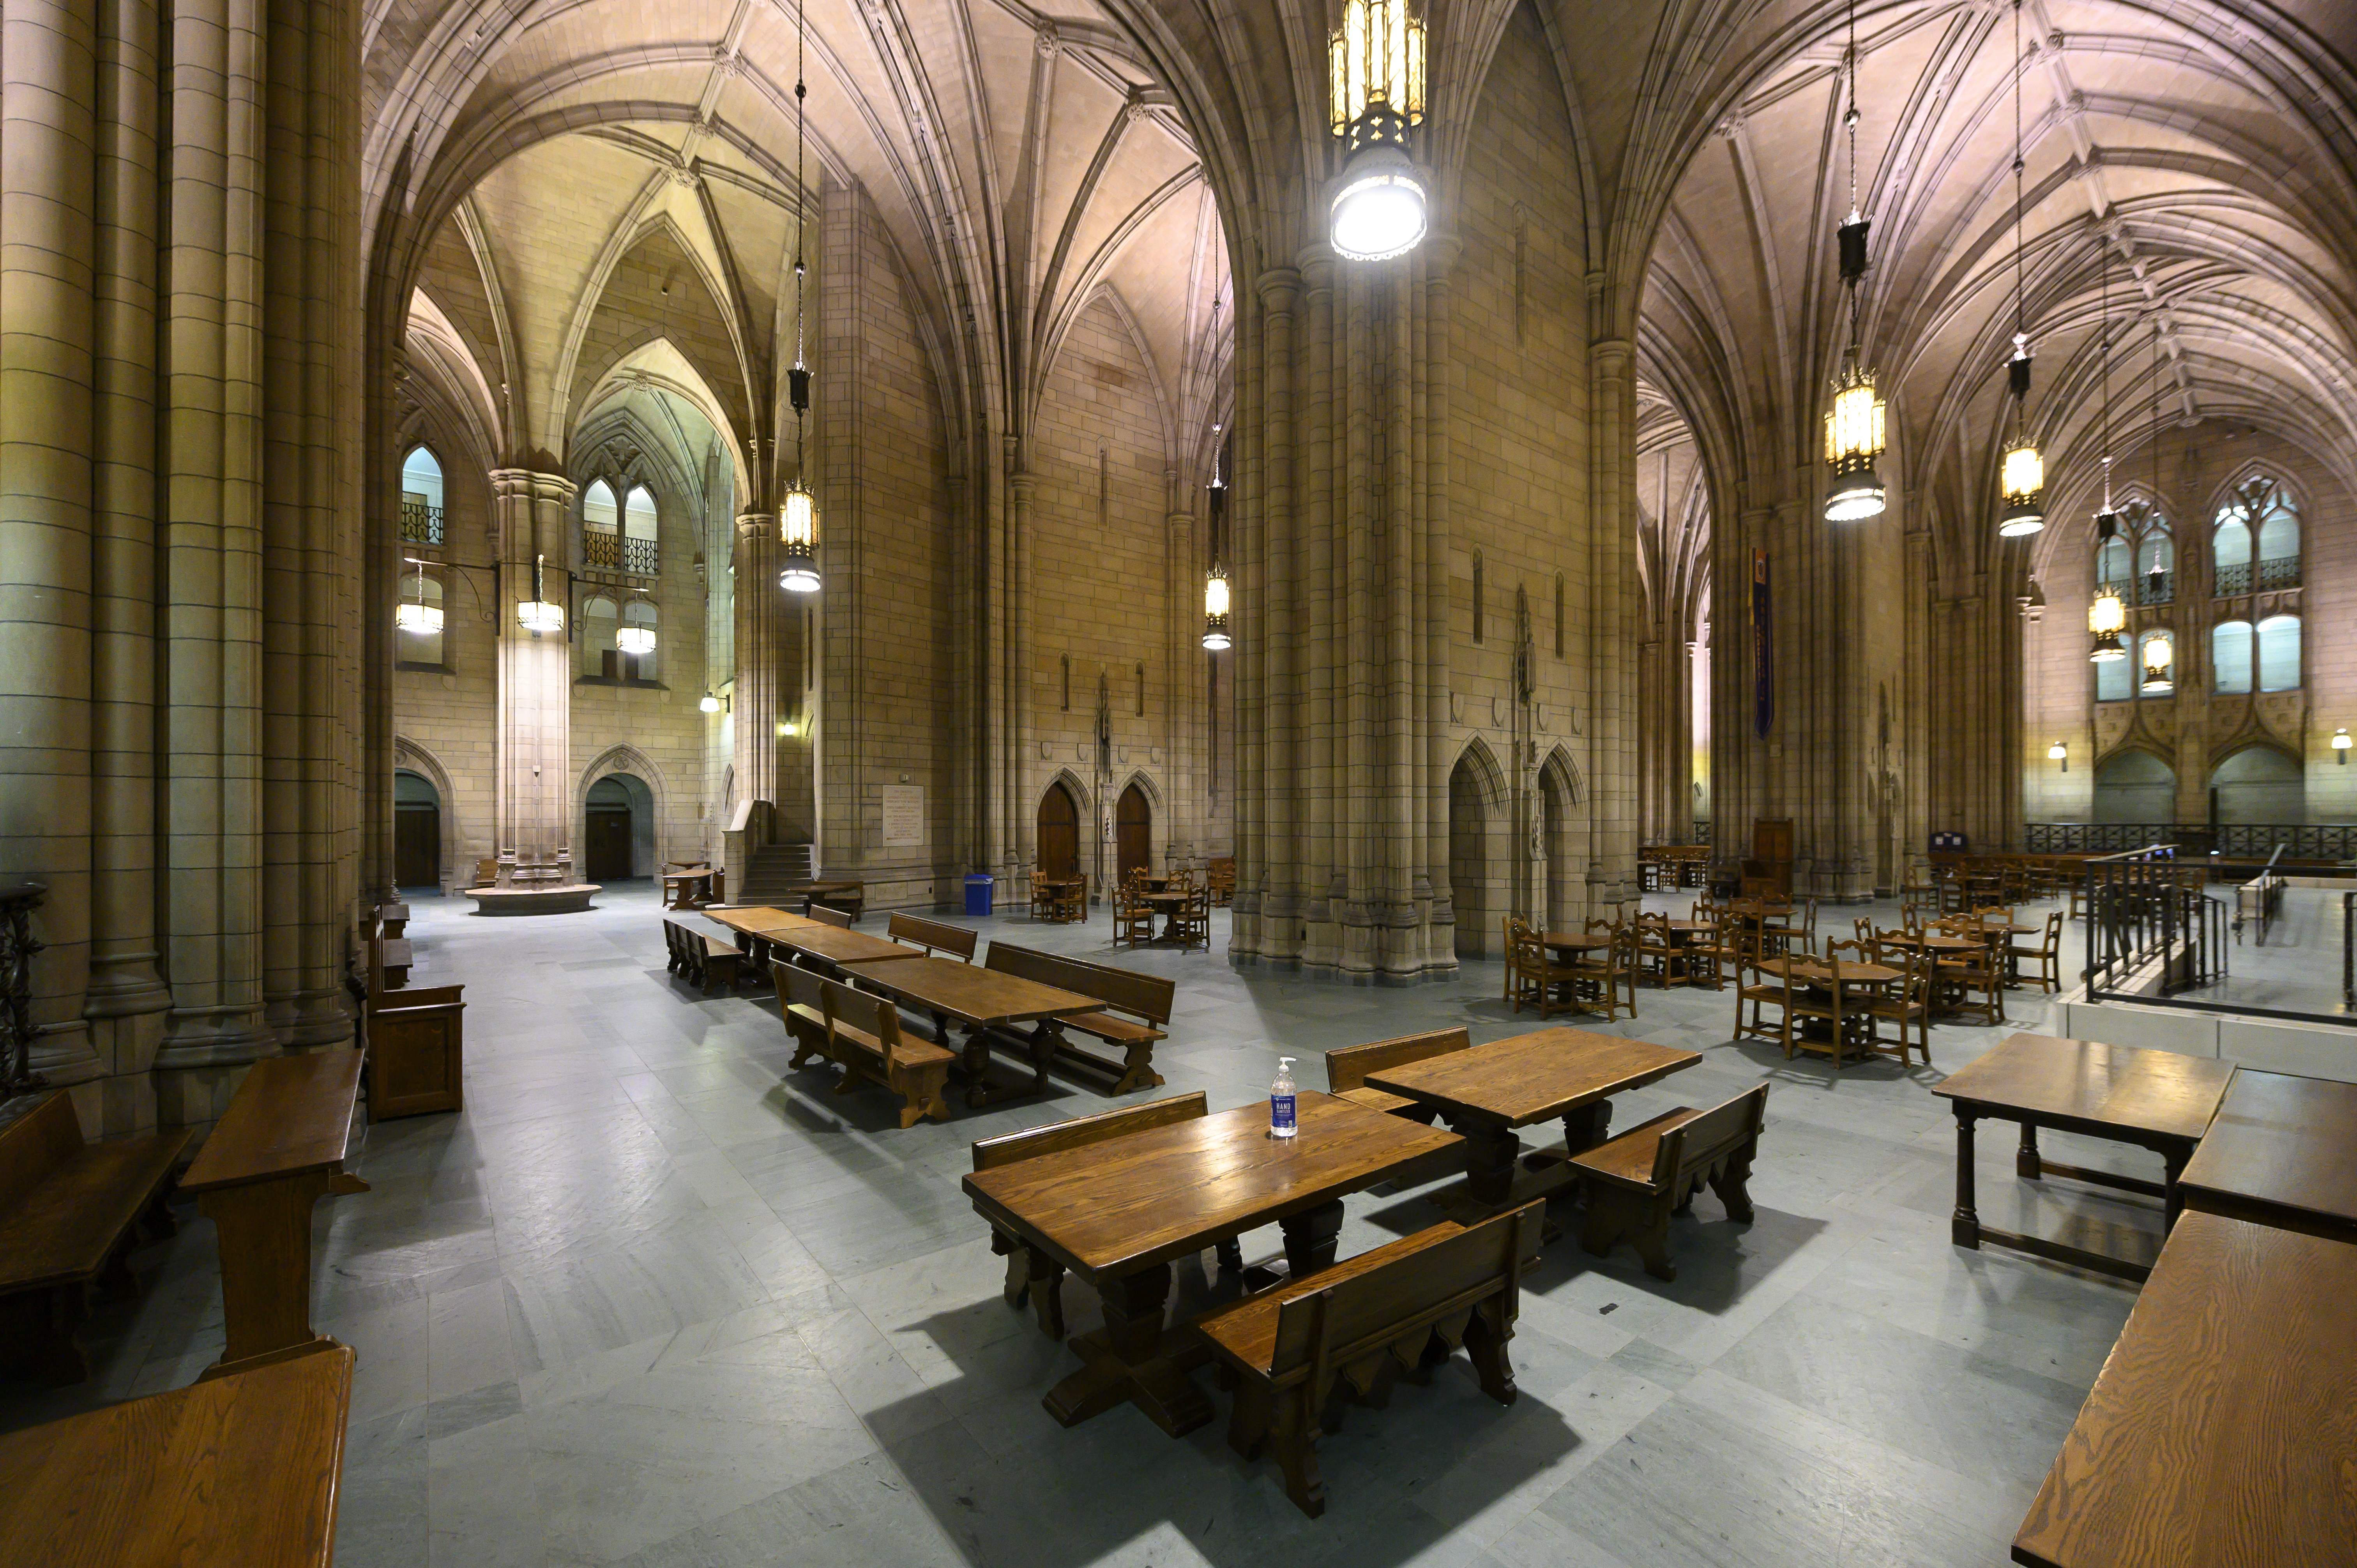 Commons Rooms Cathedral of Learning